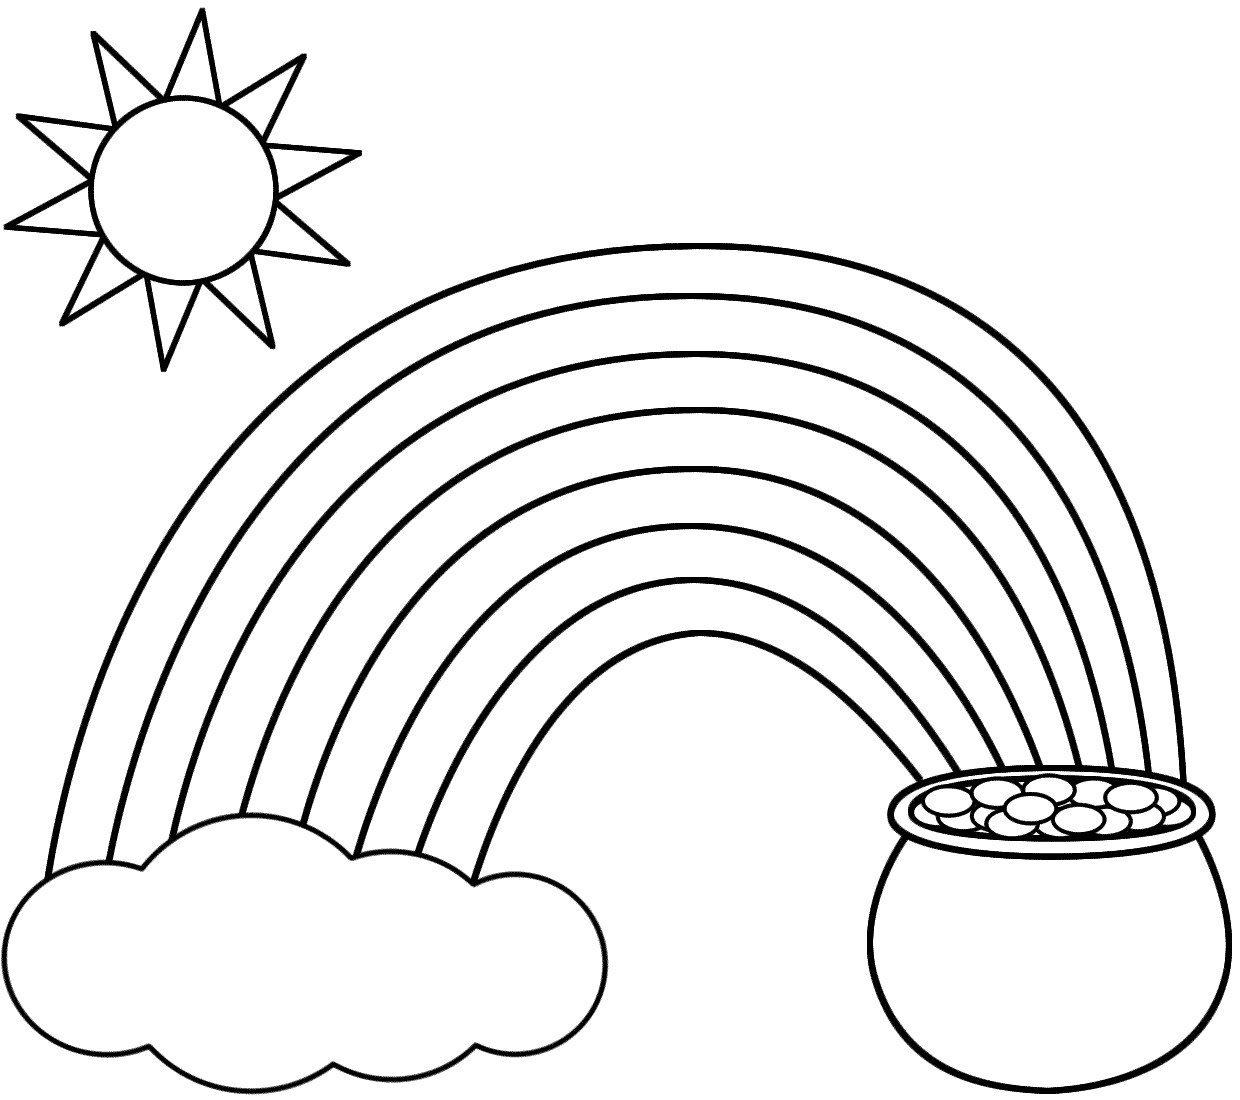 Rainbow Pictures to Print Rainbow Coloring Pages for Kids Printable